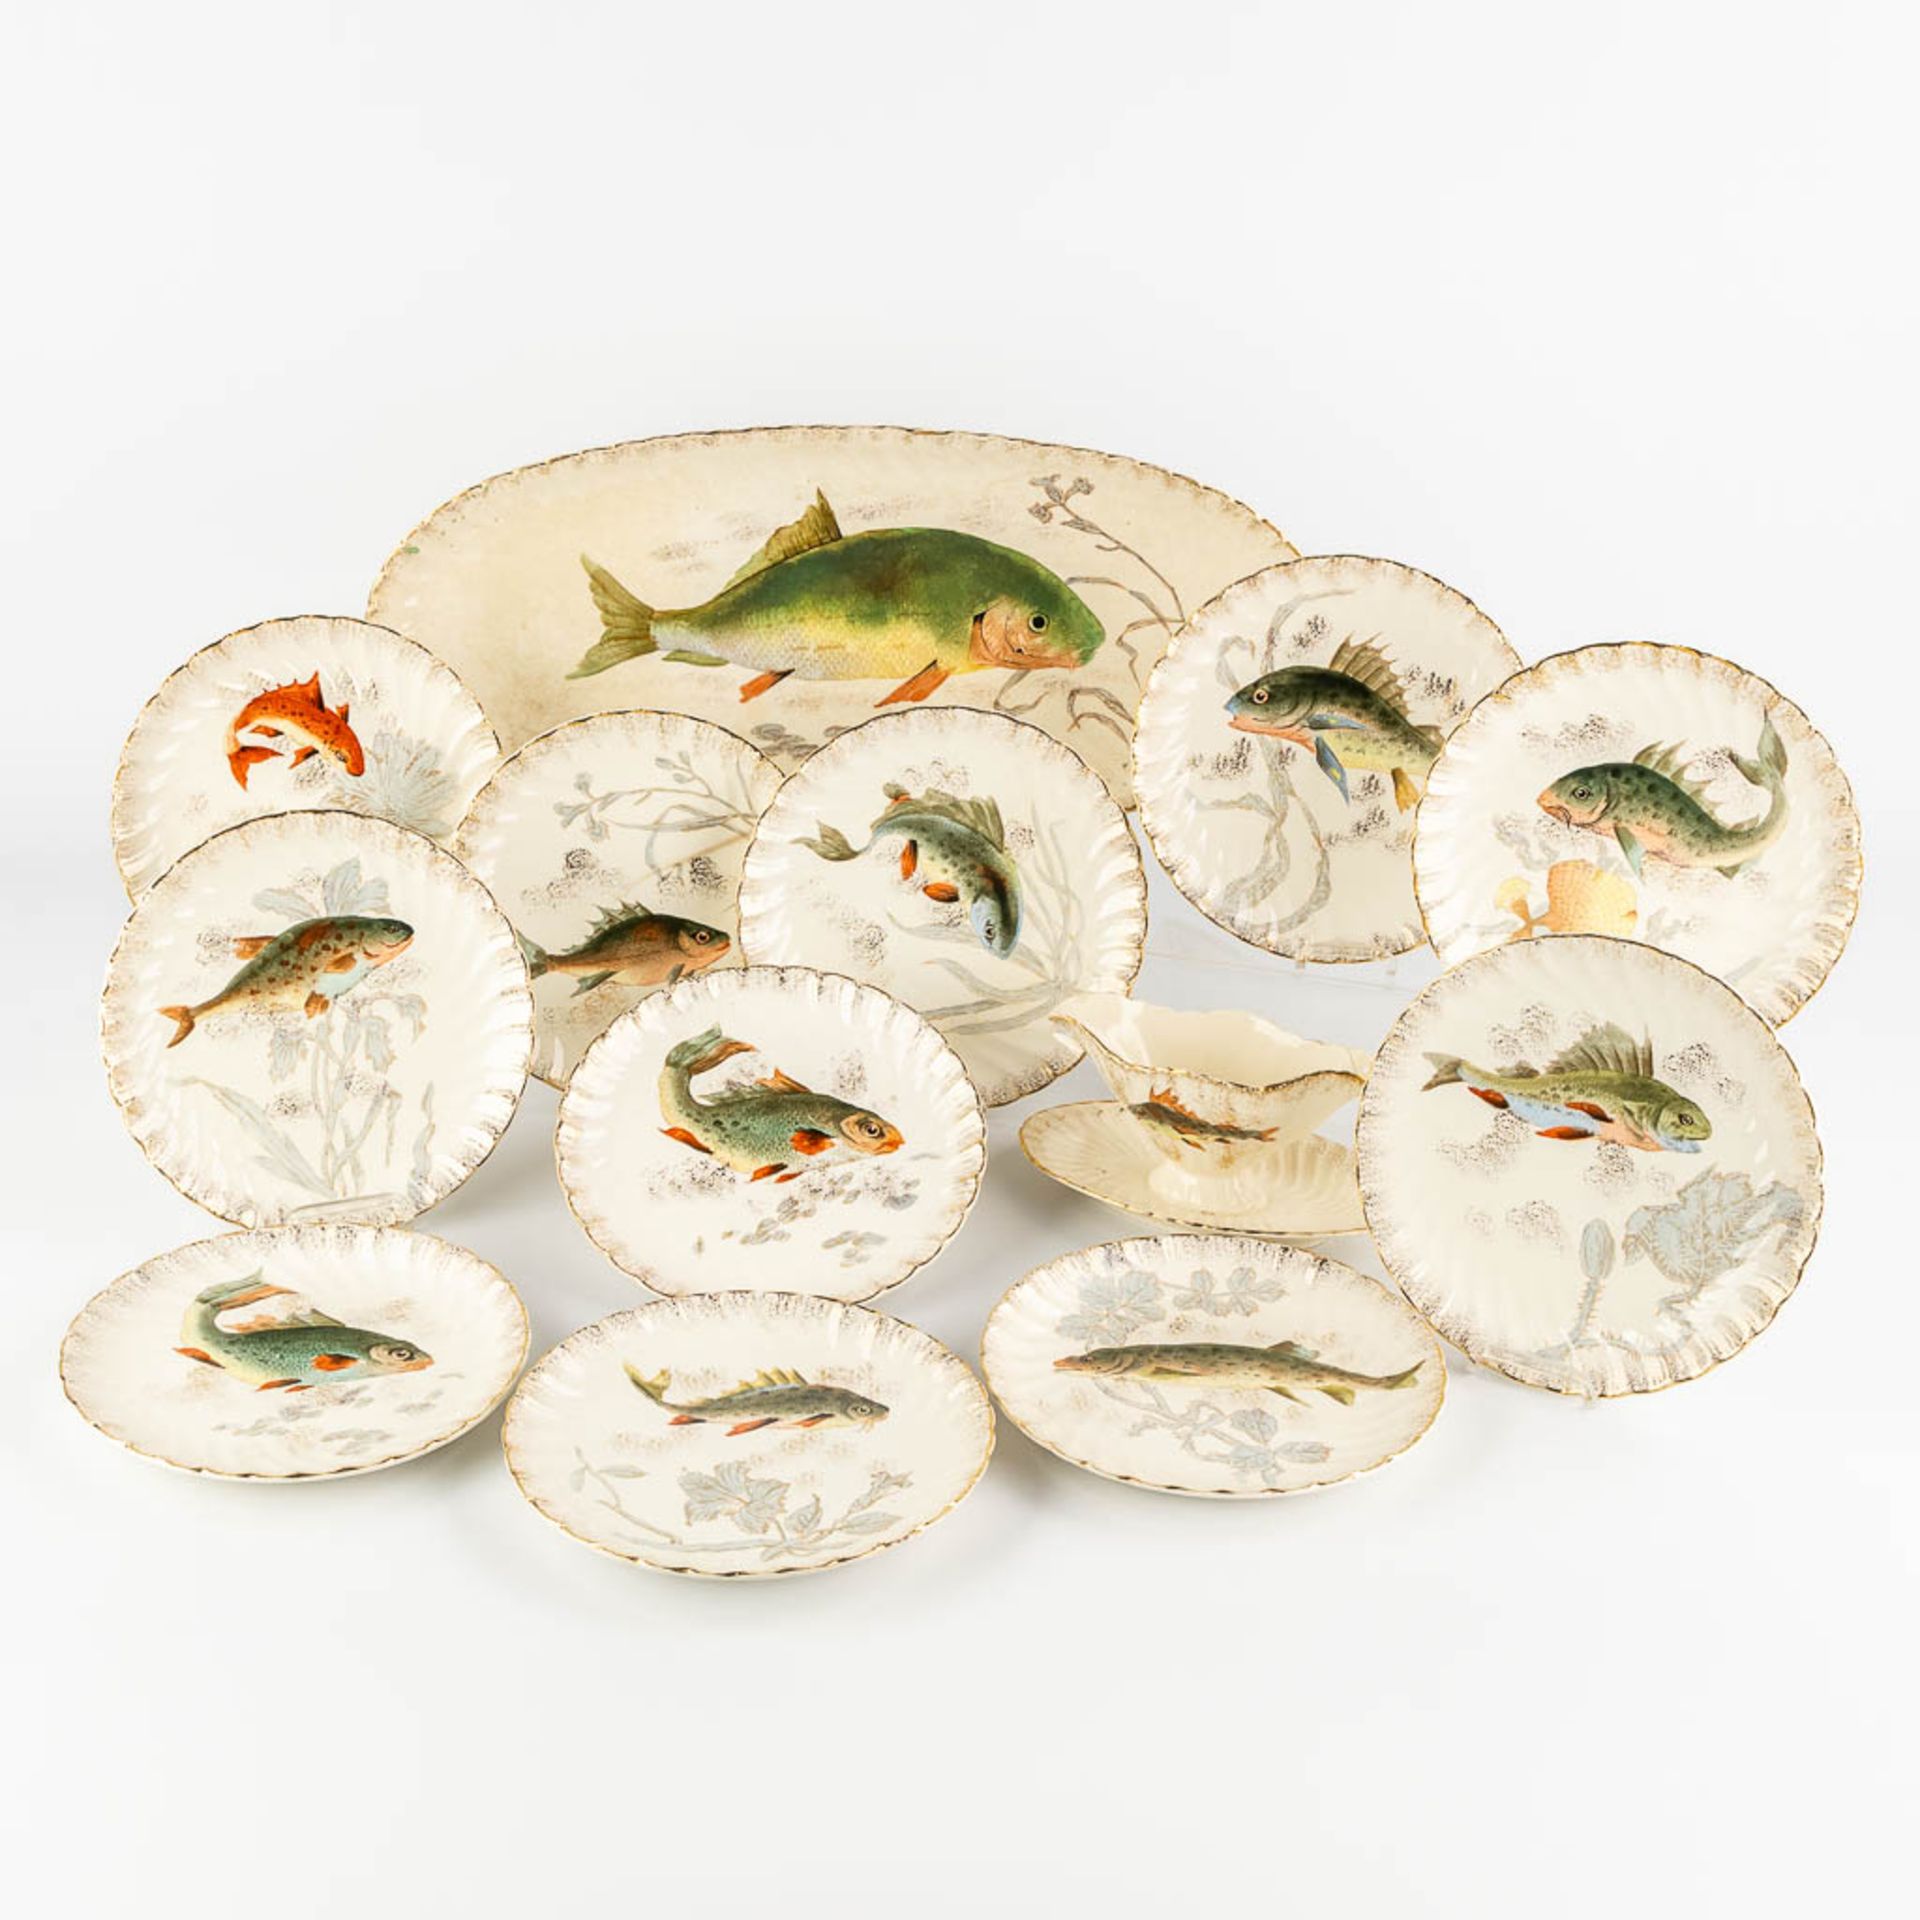 Bonn, a large fish service with serving platter and 11 plates. (W:58 x H:25 cm)